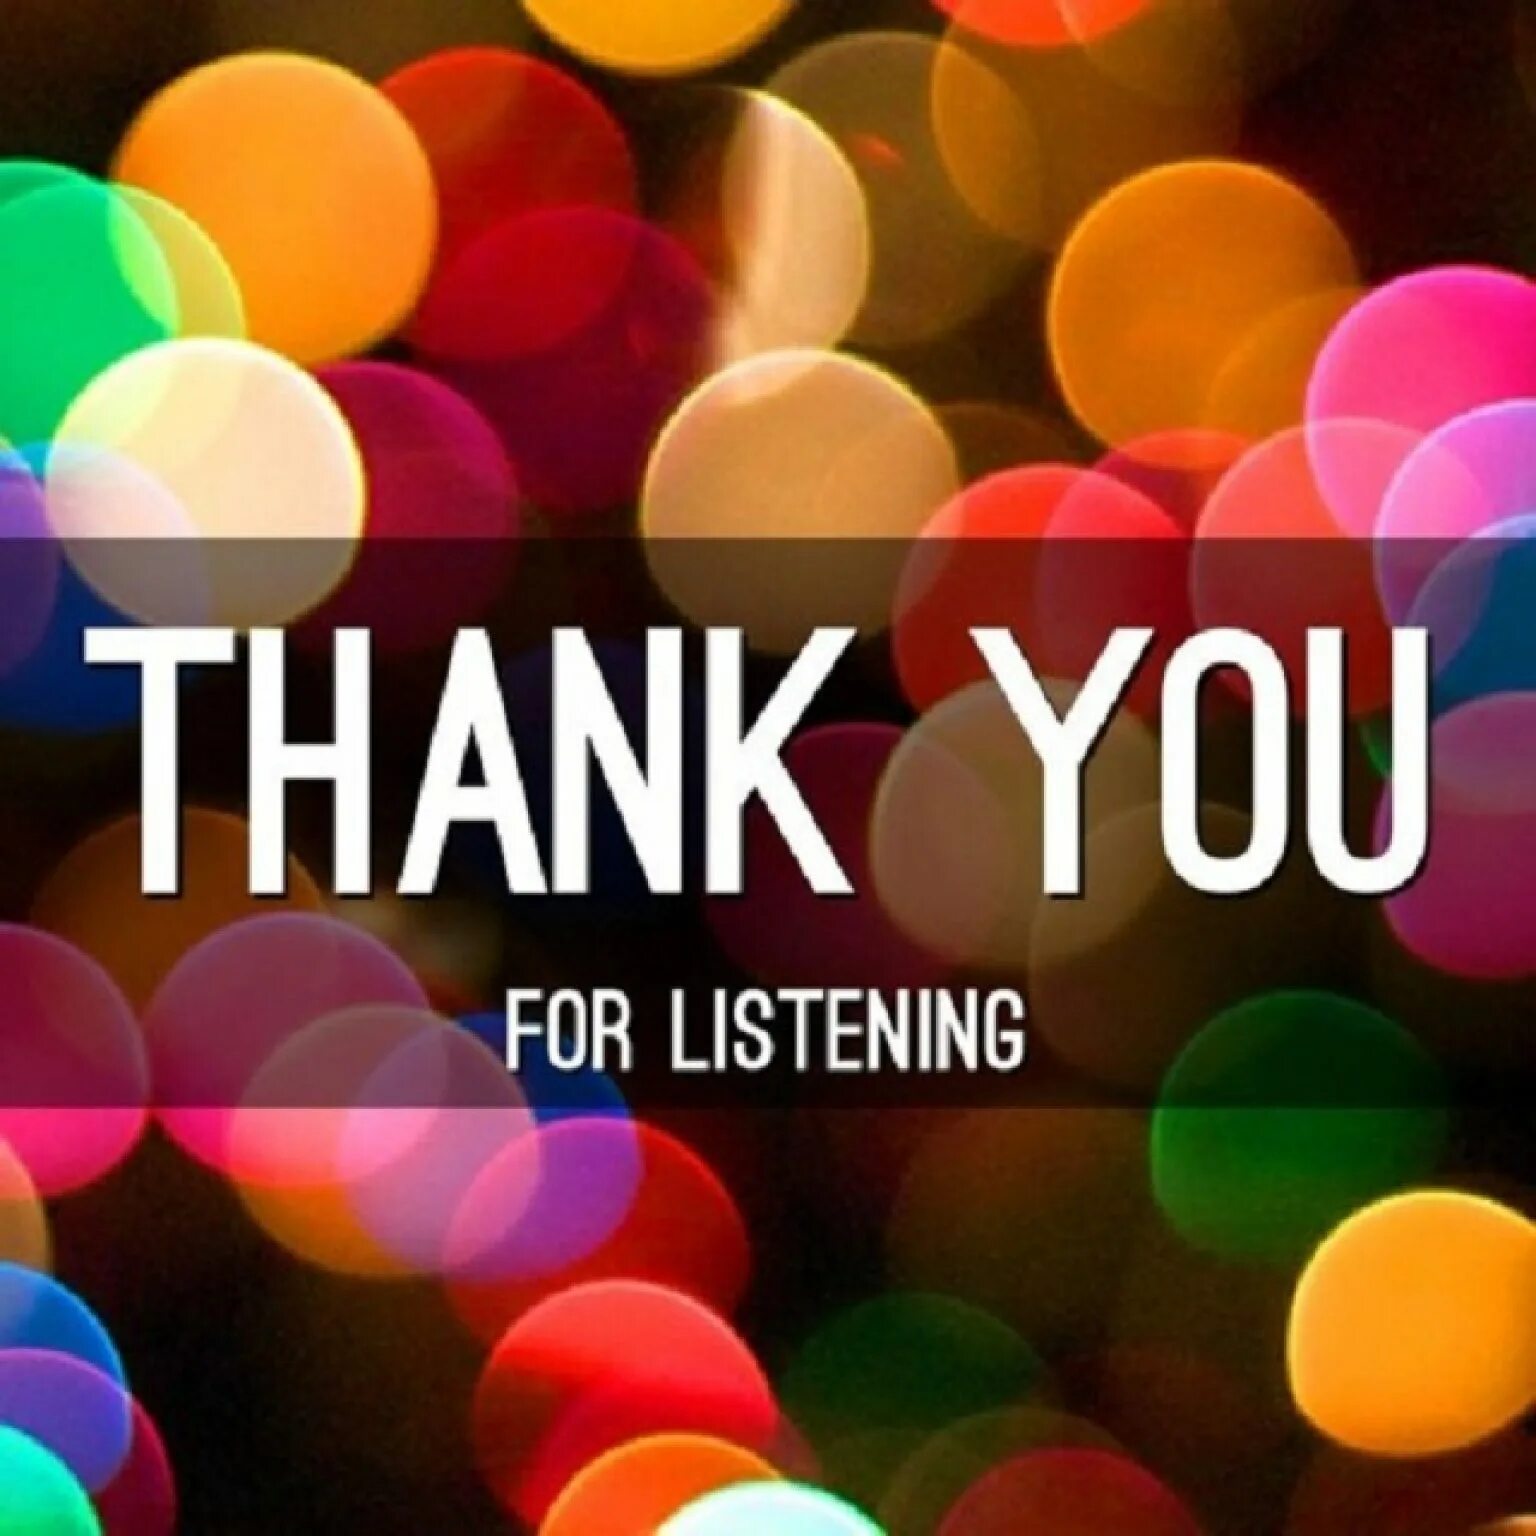 Thank you for kind. Thank you for Listening. Thank you для презентации. Thank you for Listening для презентации. Thank you for Listening картинки.